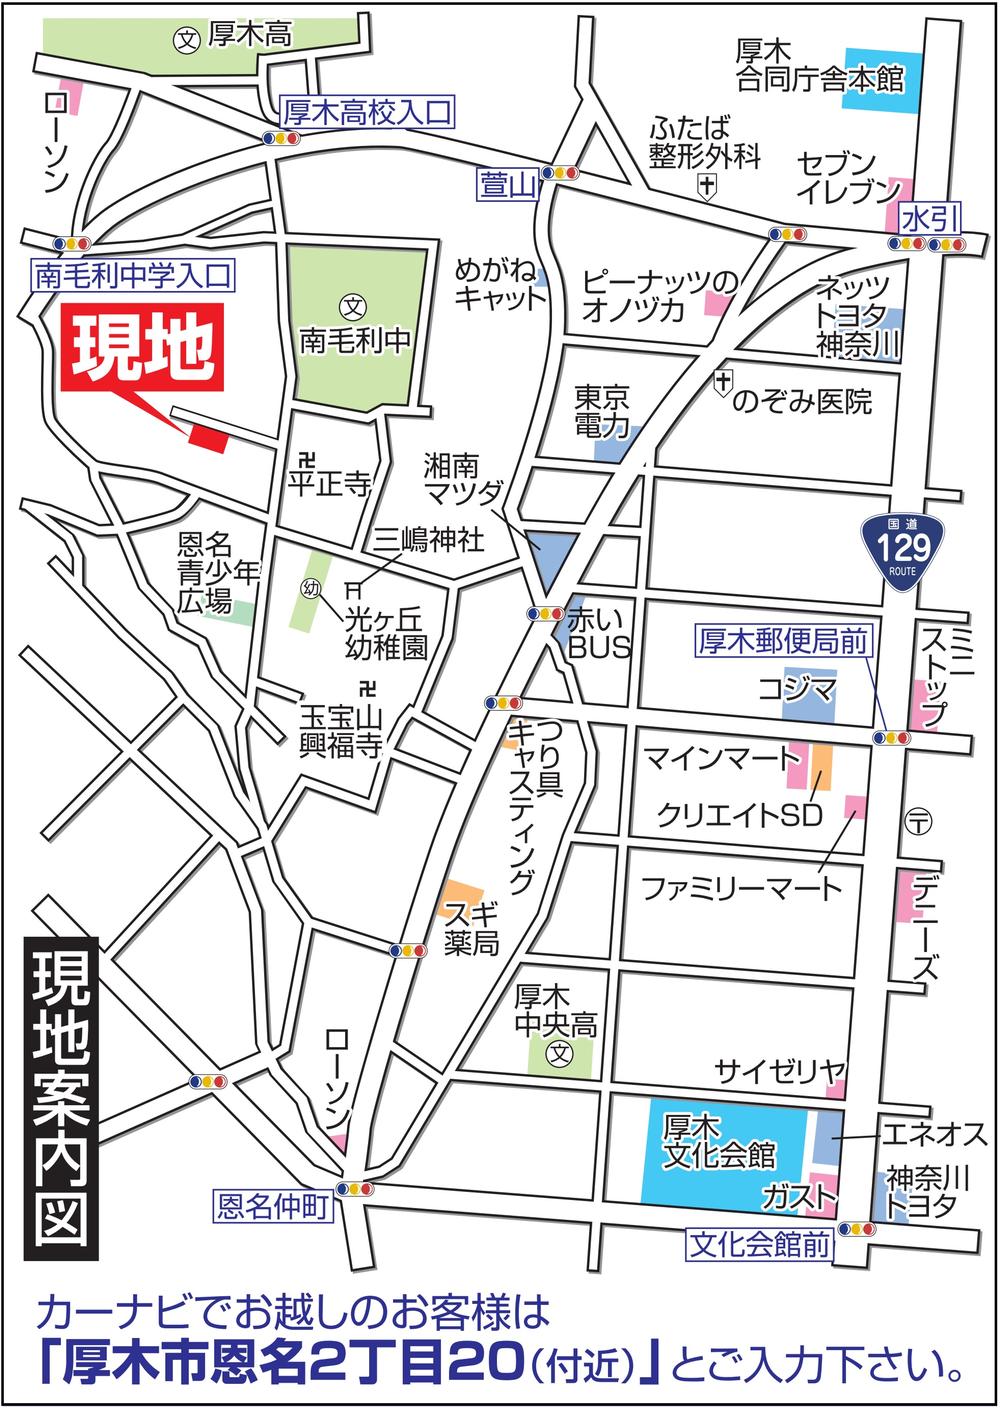 Local guide map. Please enter the "Atsugi Onna 2-chome, 20" is traveling on the car navigation system.